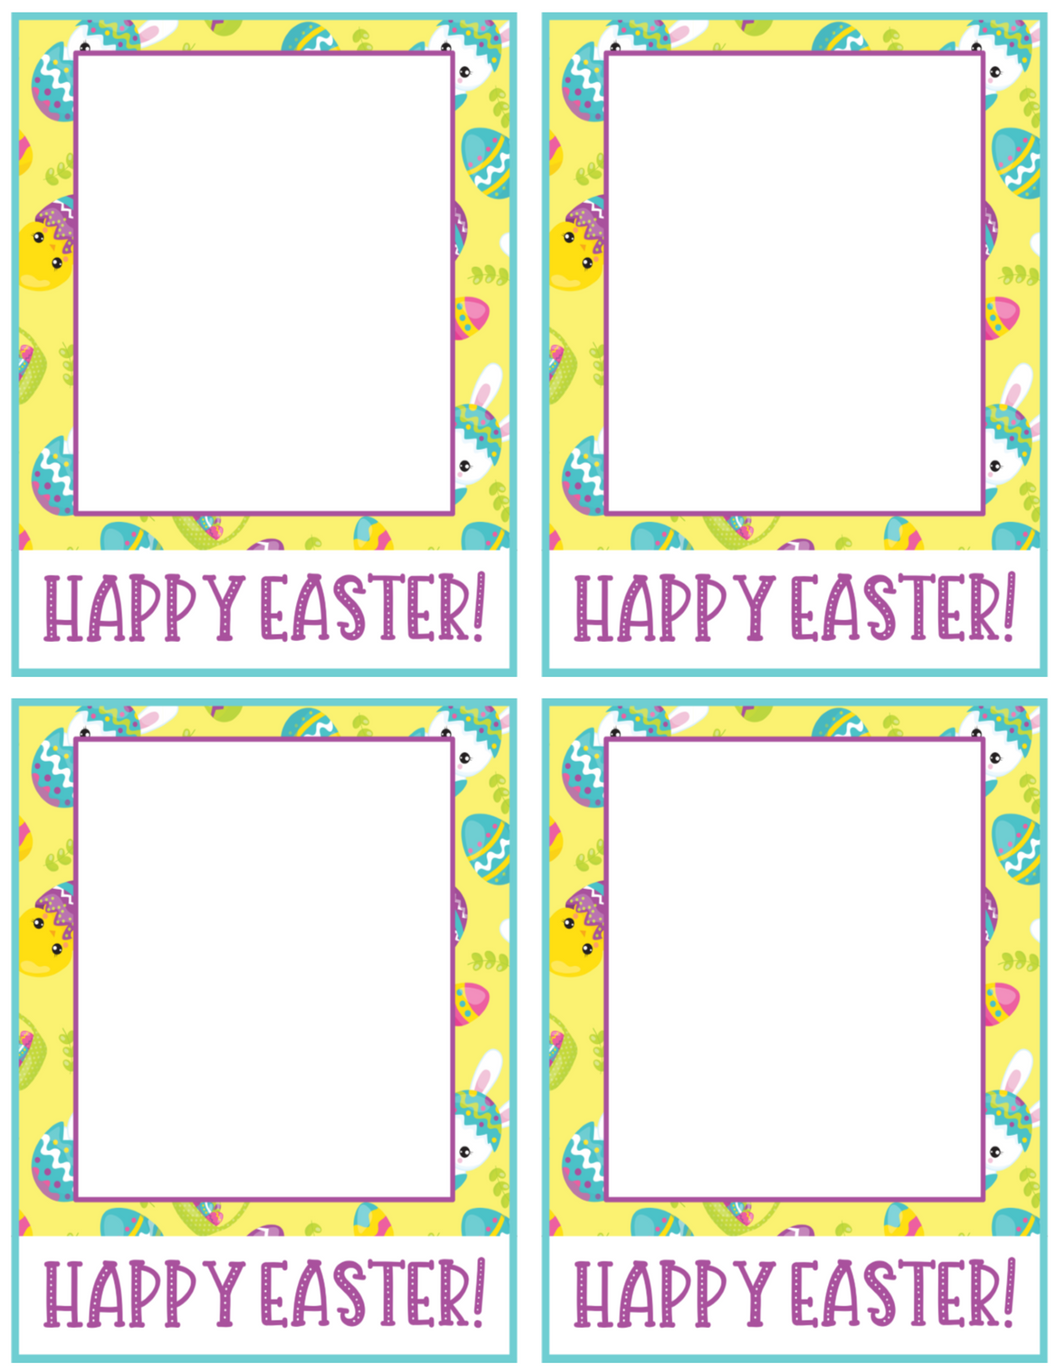 Happy Easter Card 4x5 - Dots and Bows Designs